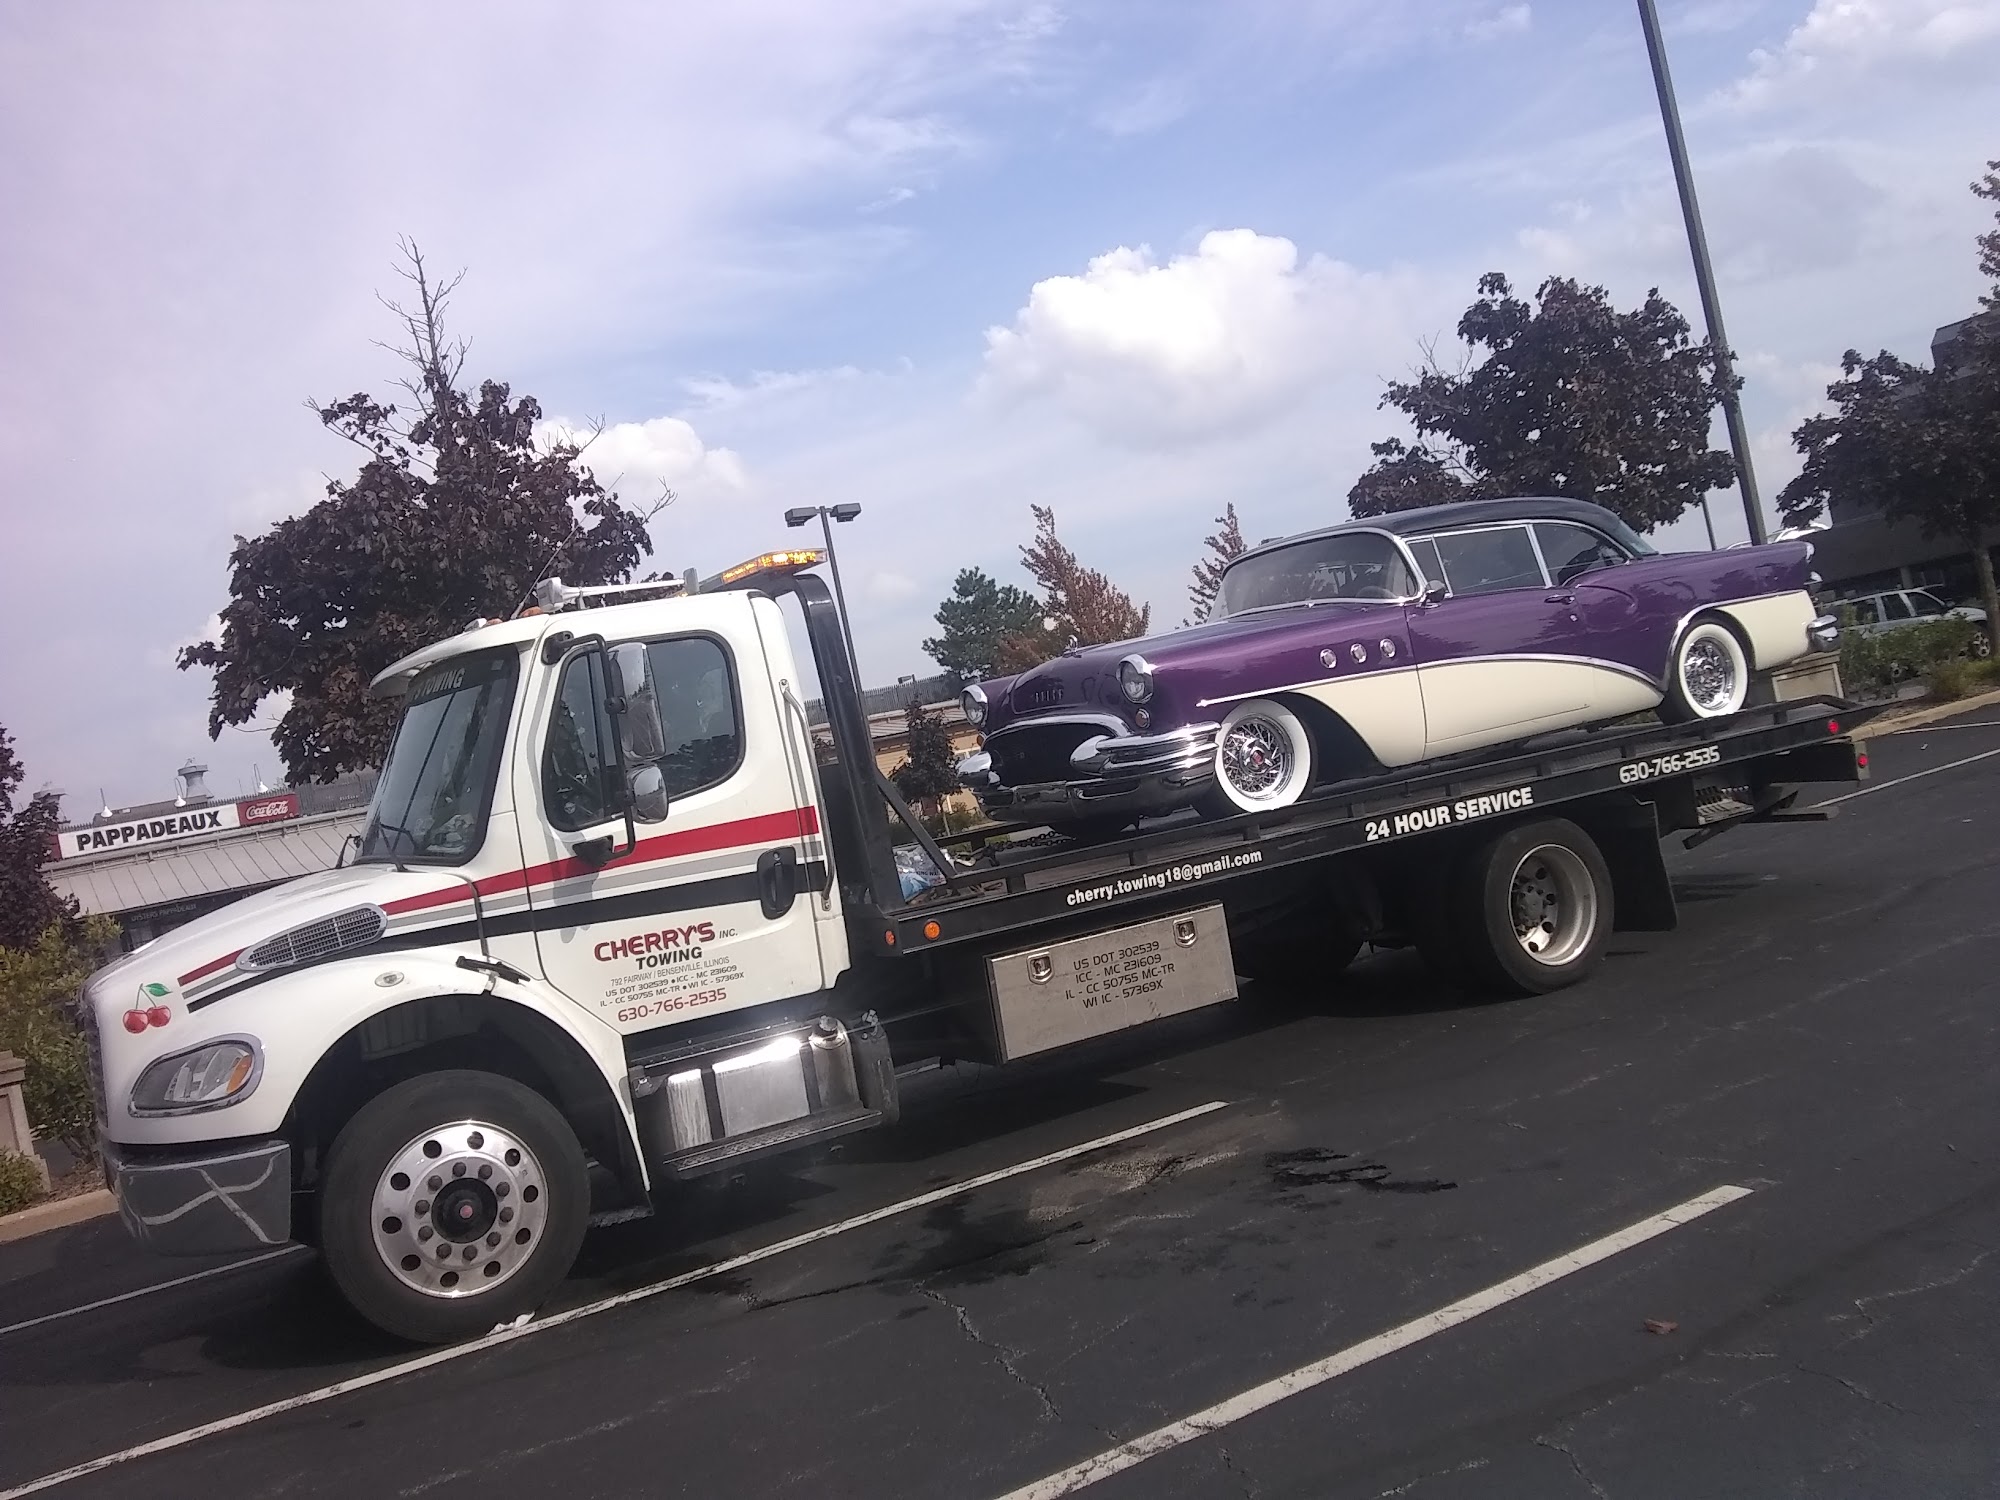 Cherry's Towing